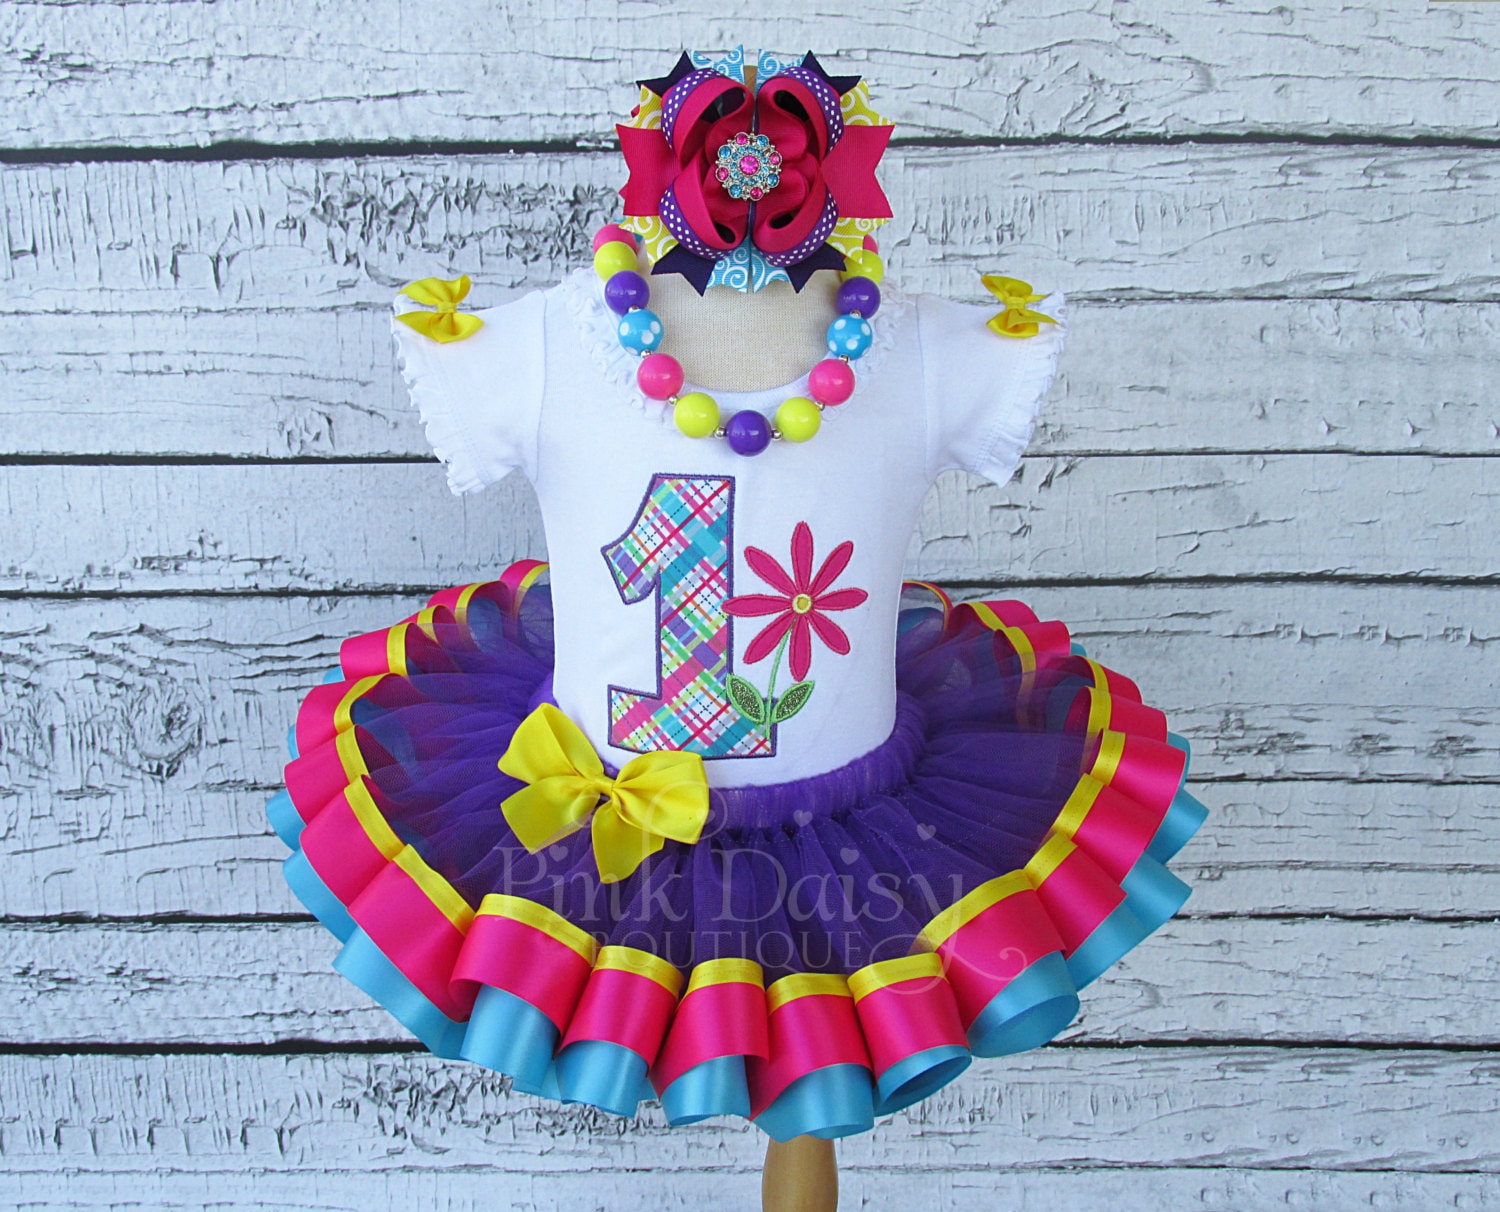 Girls Daisy Flower Garden Appliqué Shirt and Ribbon Tutu Birthday Set  W/matching Bow and Chunky Necklace Pink Purple Turquoise Yellow 